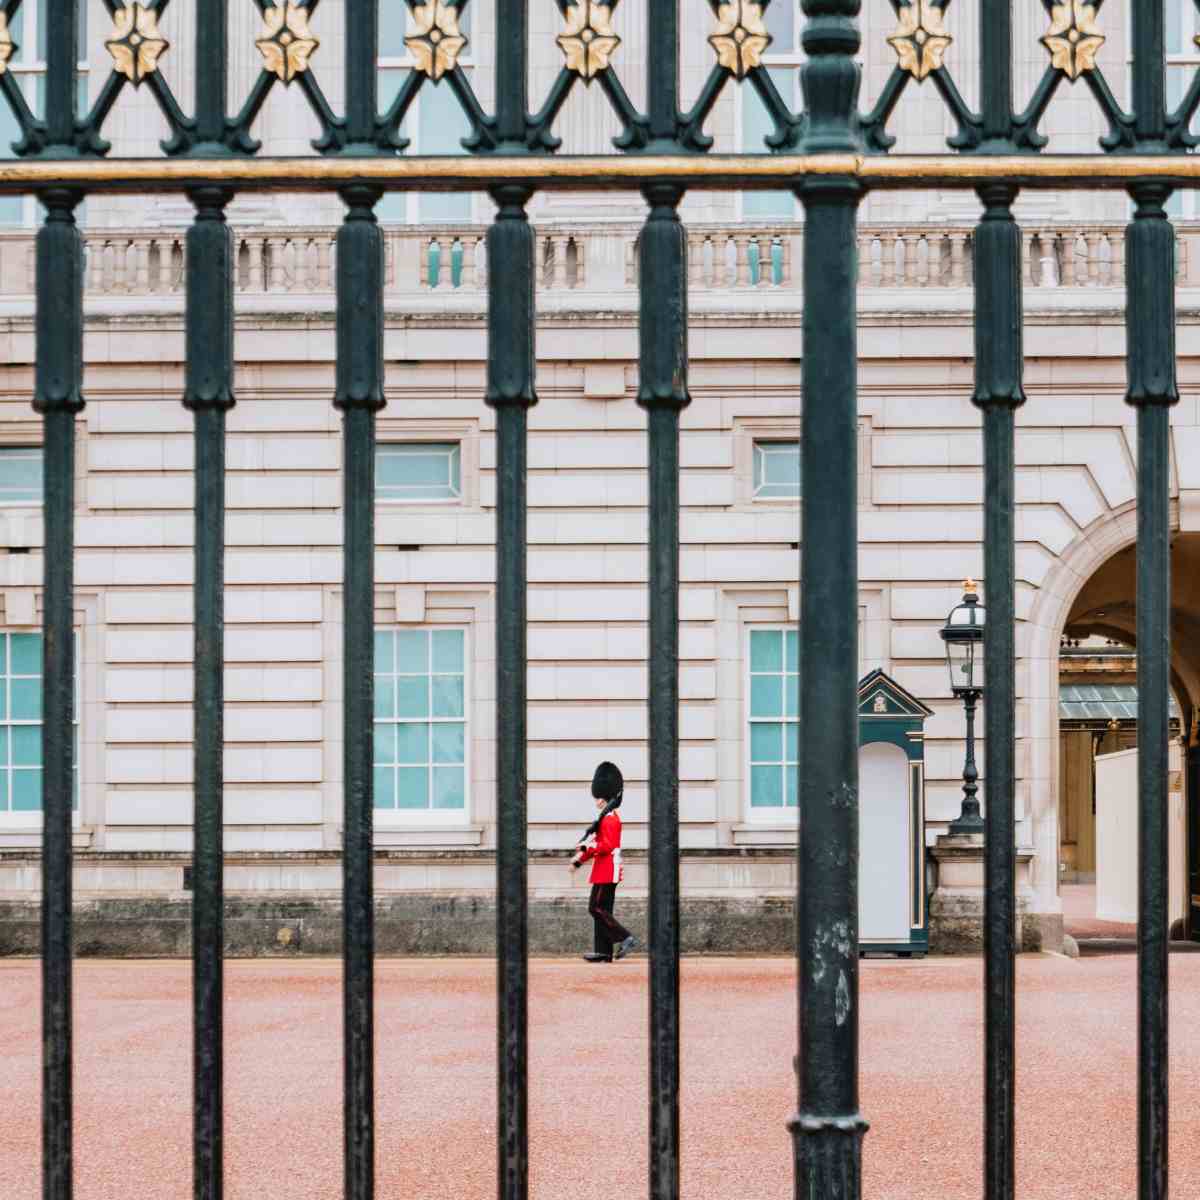 A palace guard paces in front of Buckingham Palace.